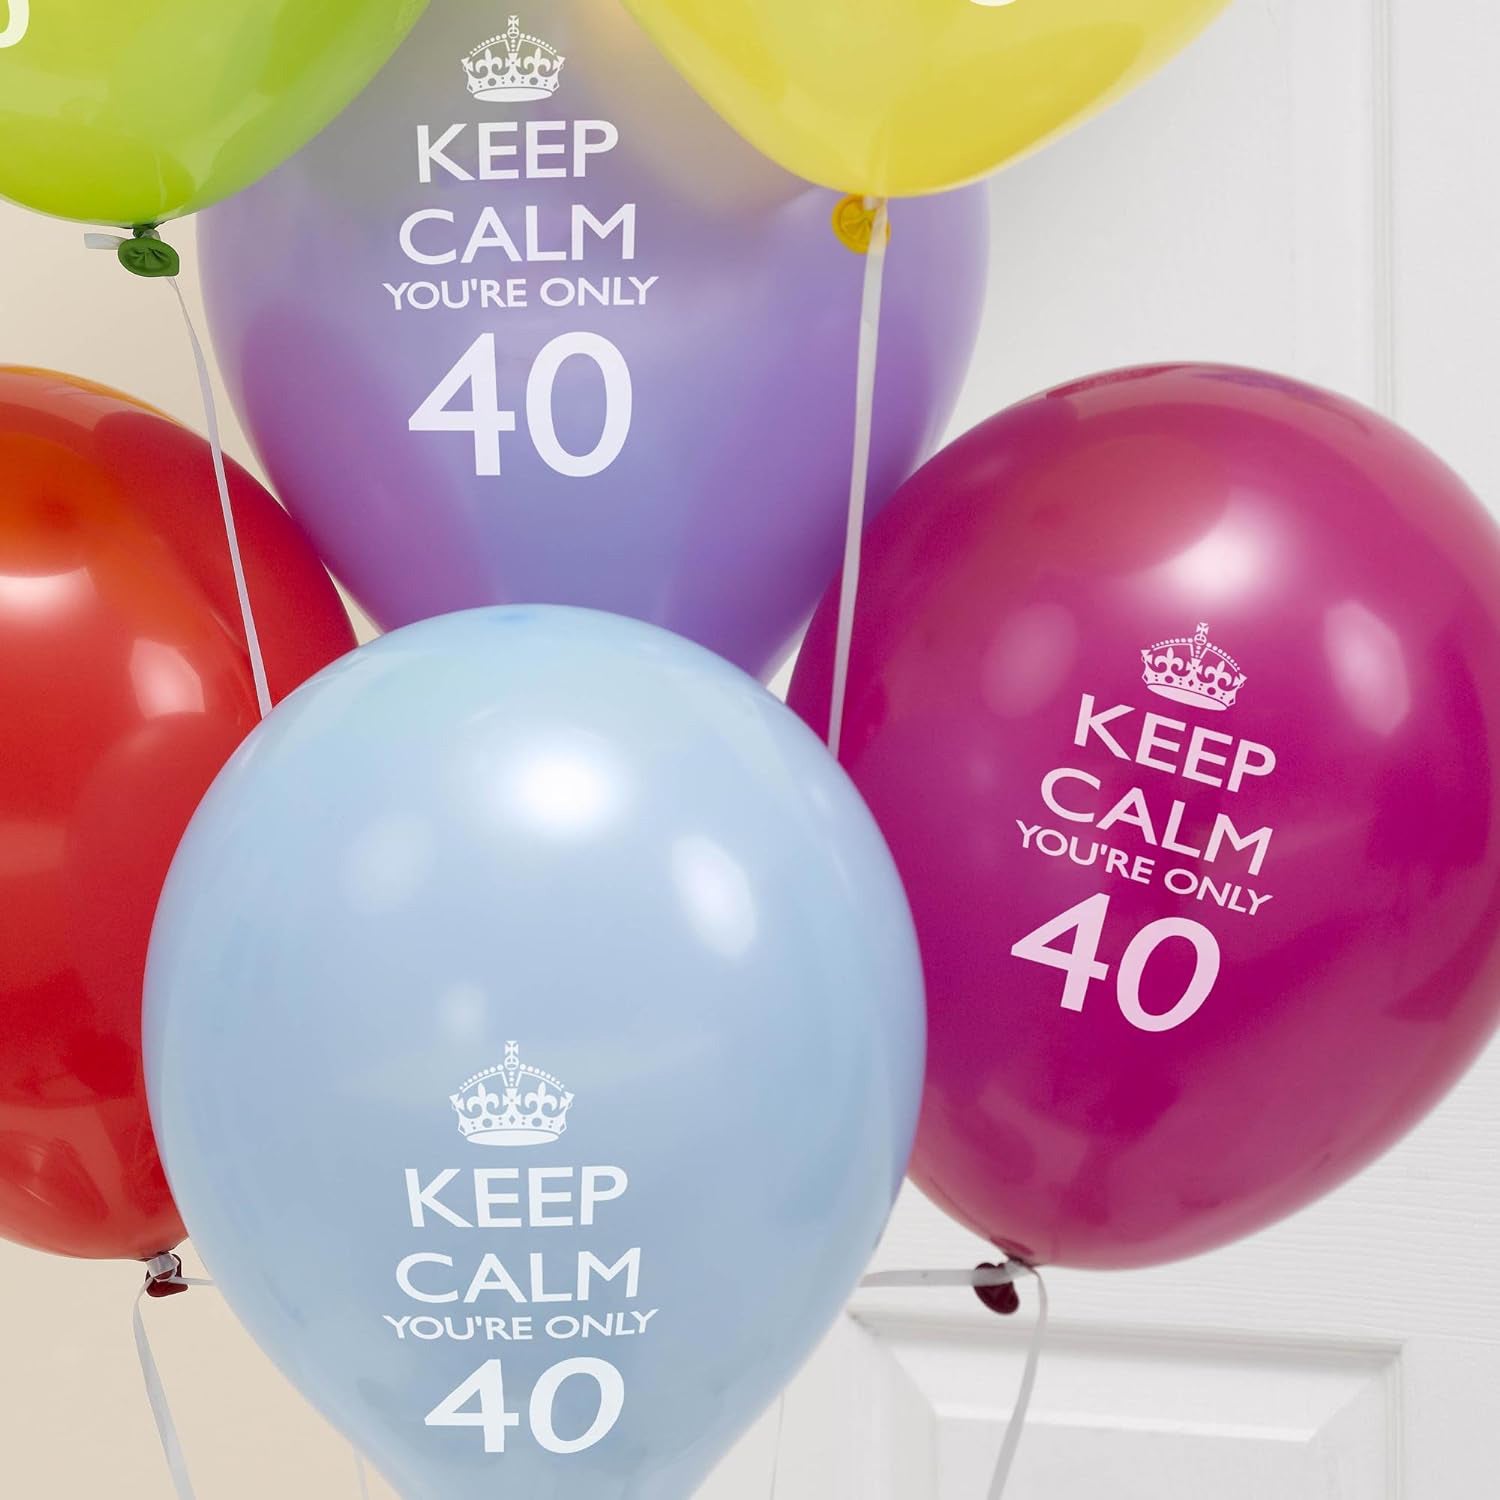 Keep Calm You're Only 40 Balloons - Pack of 8